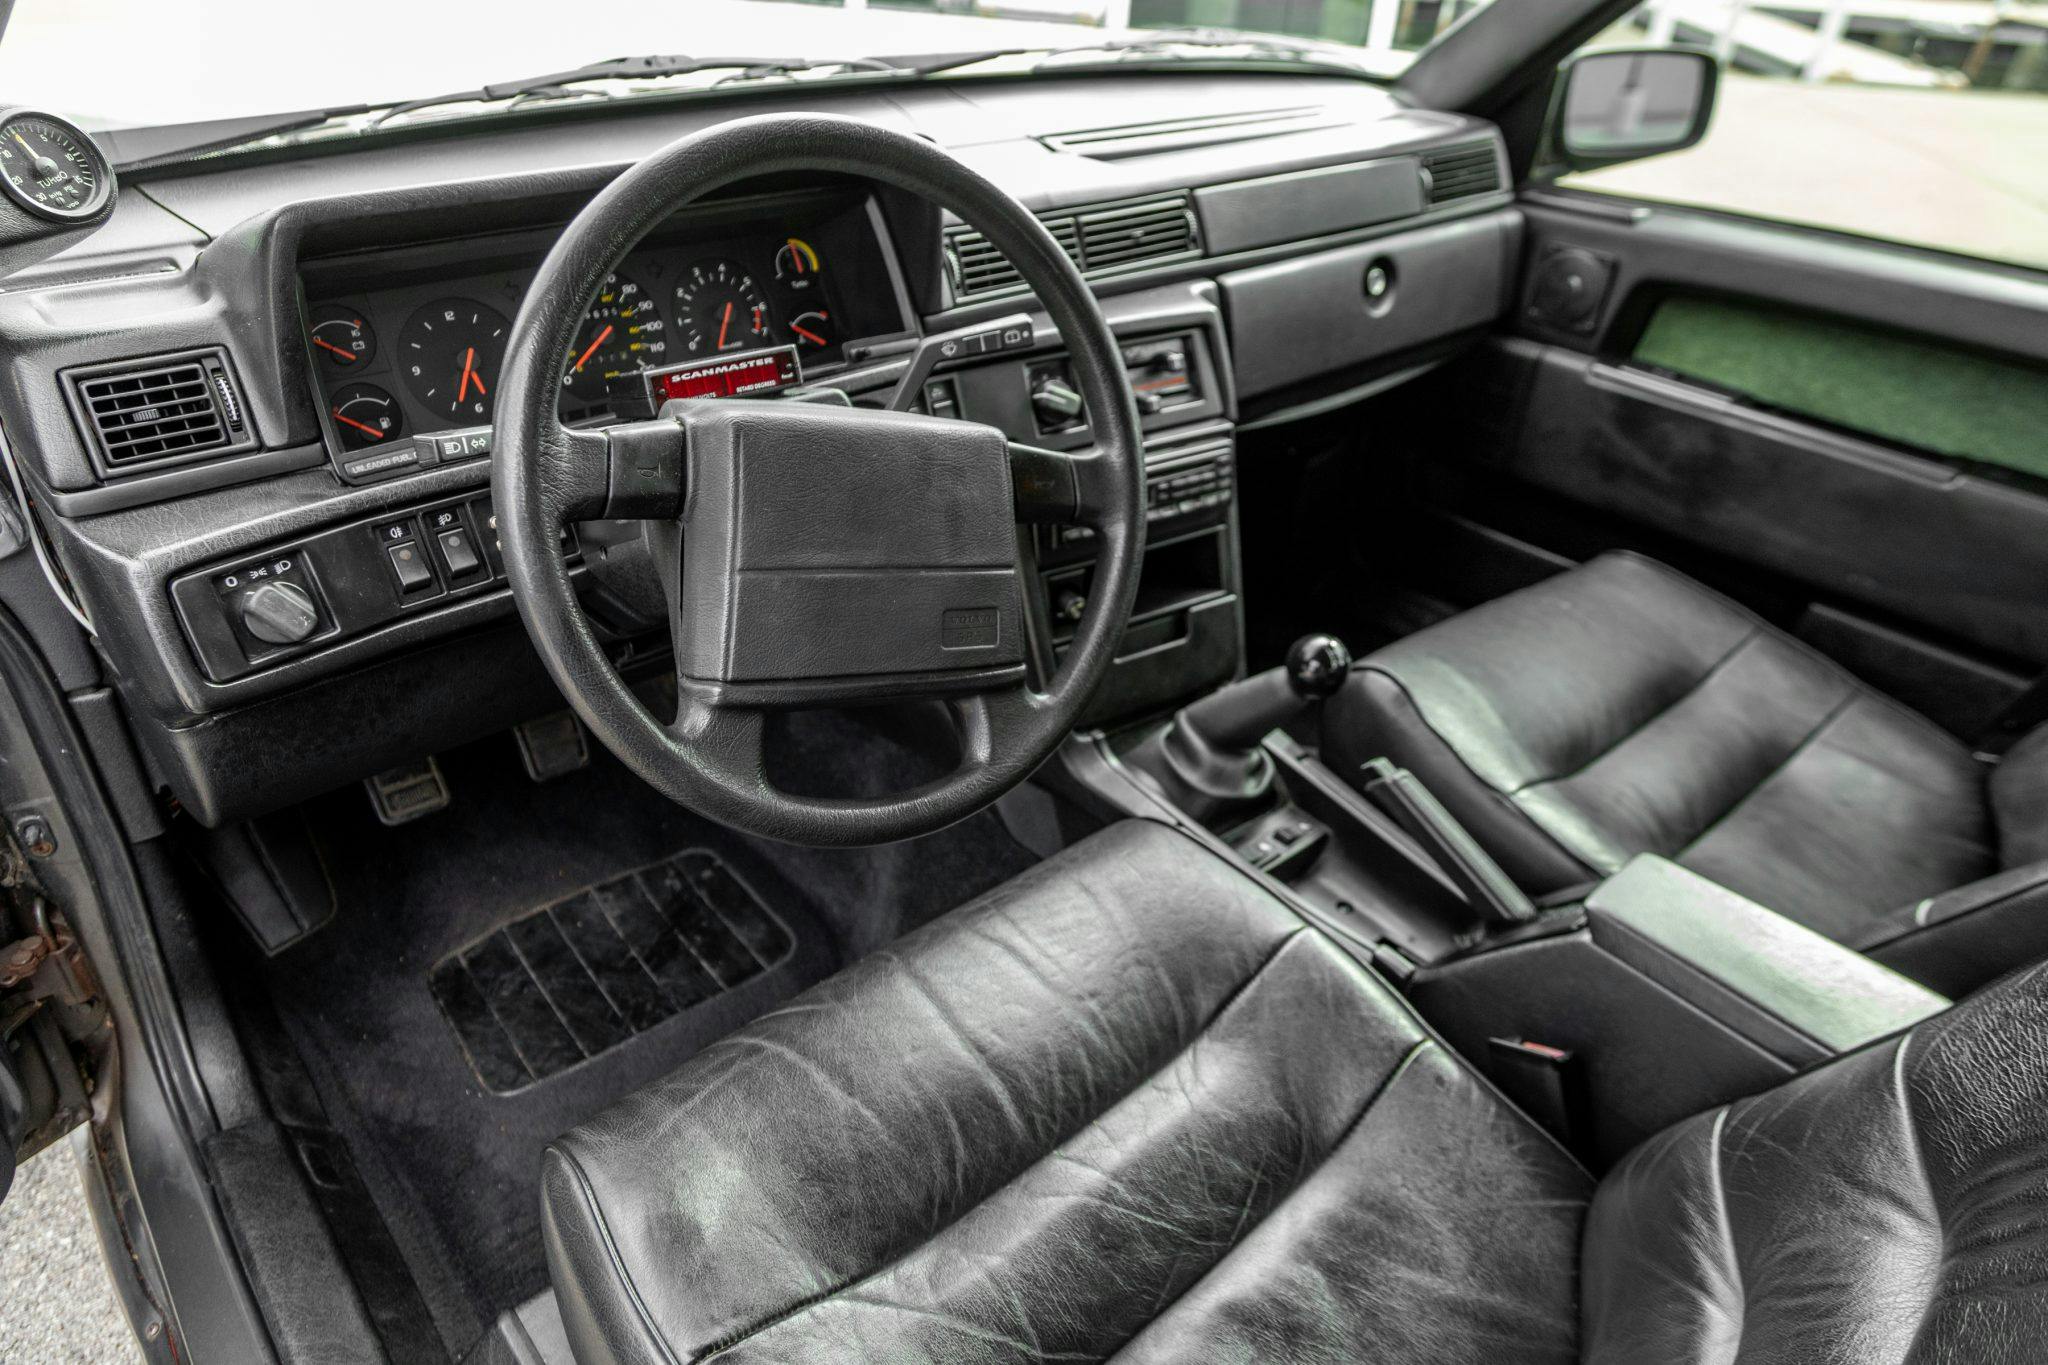 Paul Newman owned 1988 Volvo 740 custom interior front